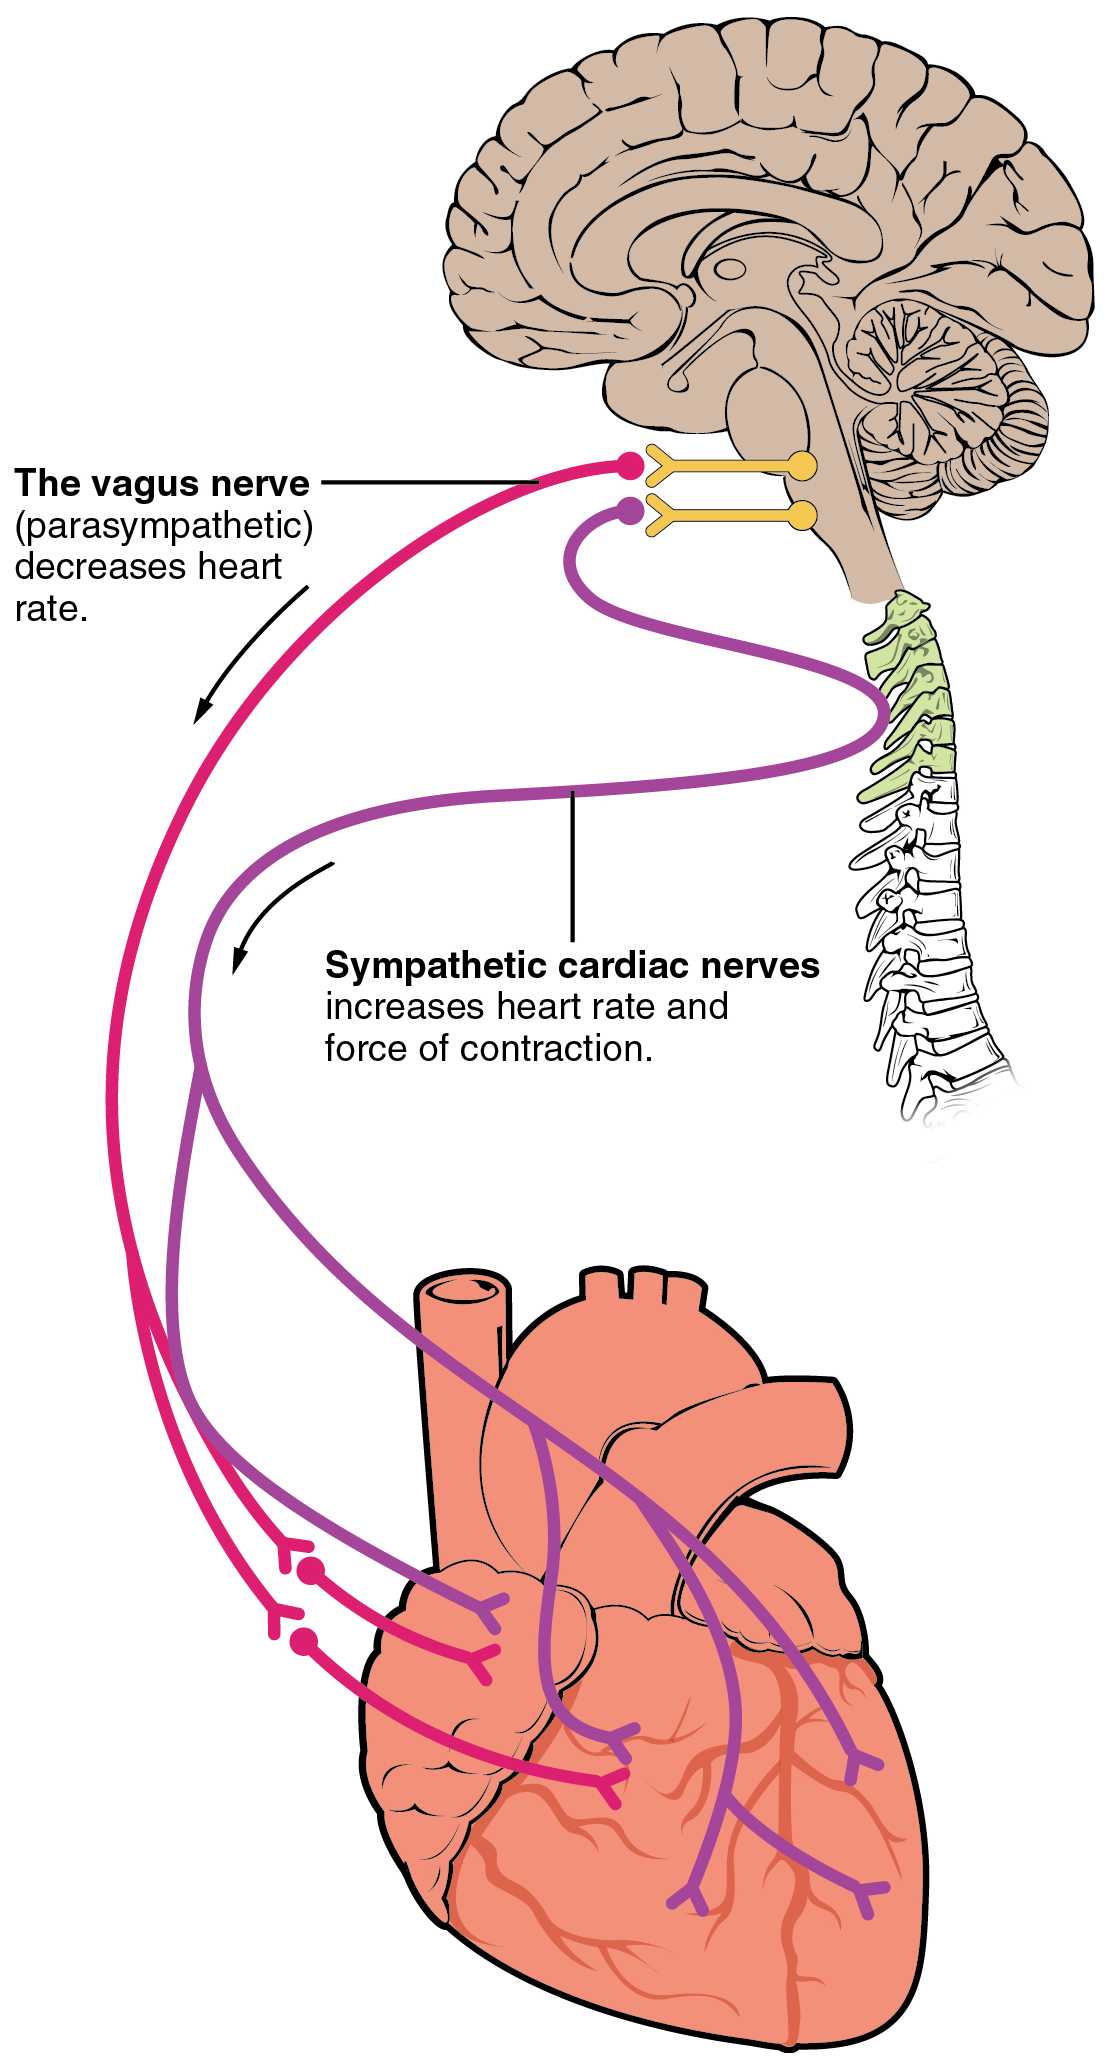 Illustration, with labels, showing the route between the vagus and sympathetic cardiac nerves.